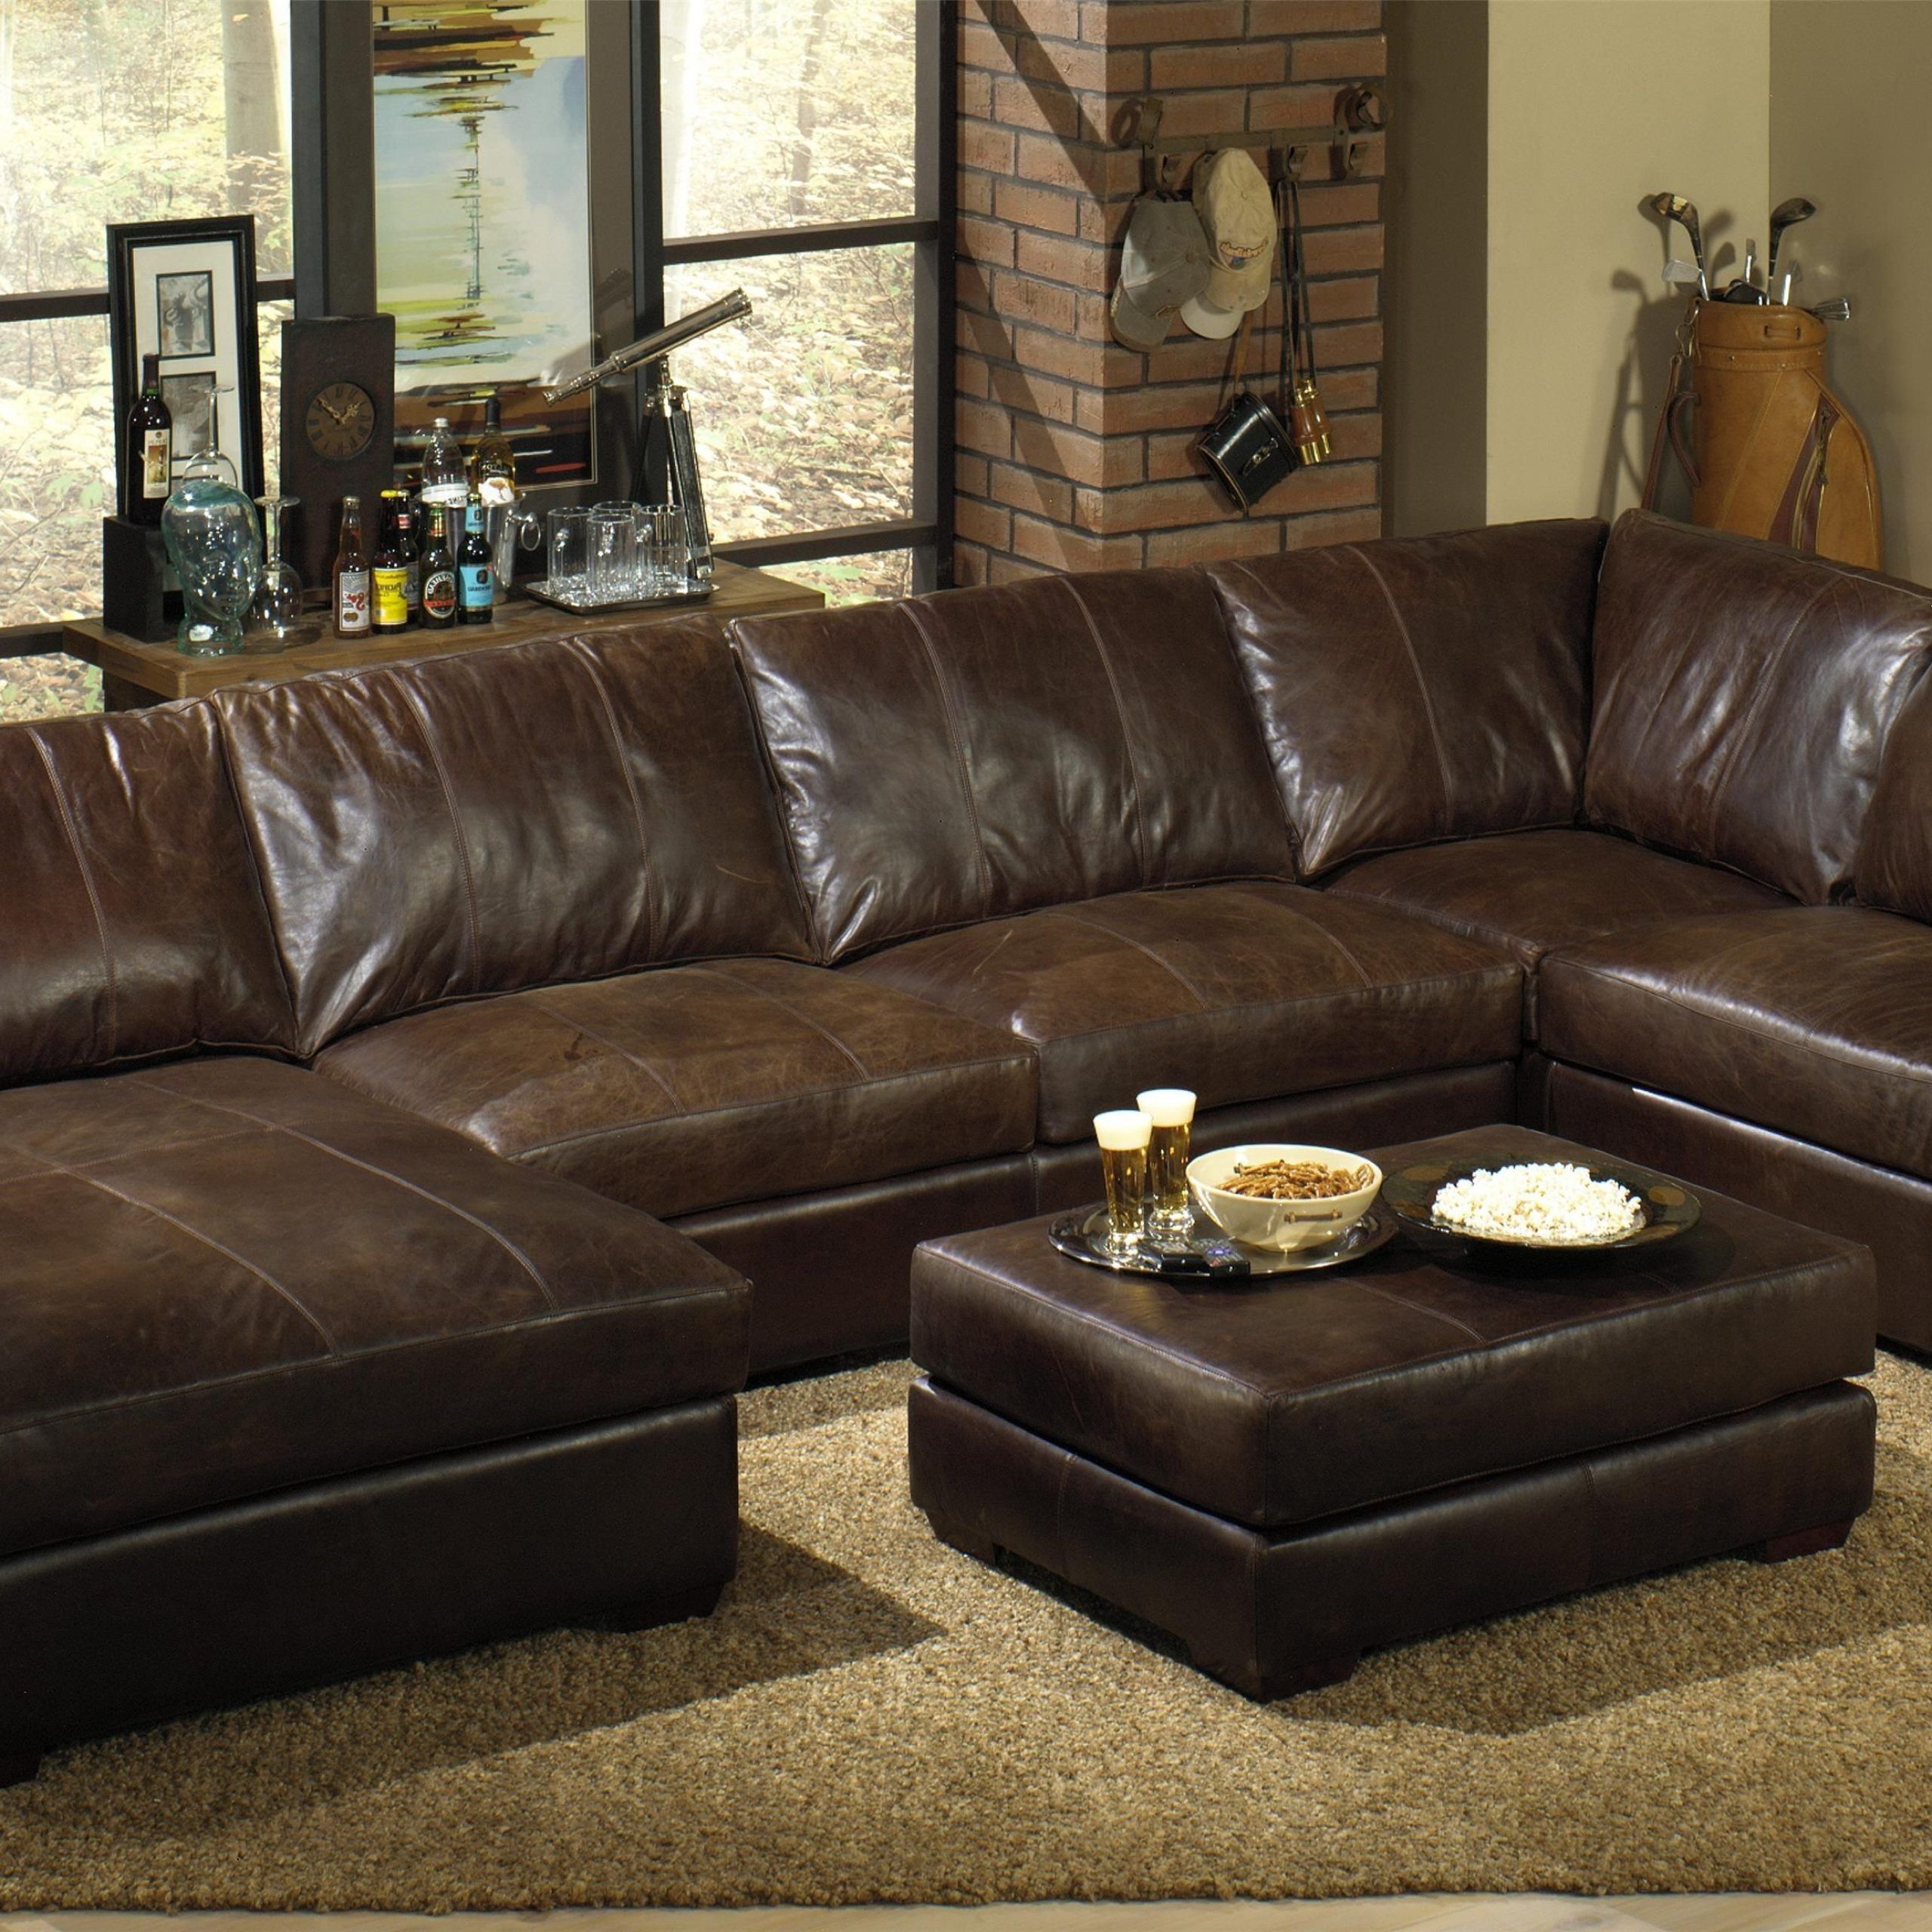 Leather Sectional Sofa – Sofas Design Ideas In 3 Piece Leather Sectional Sofa Sets (View 14 of 20)